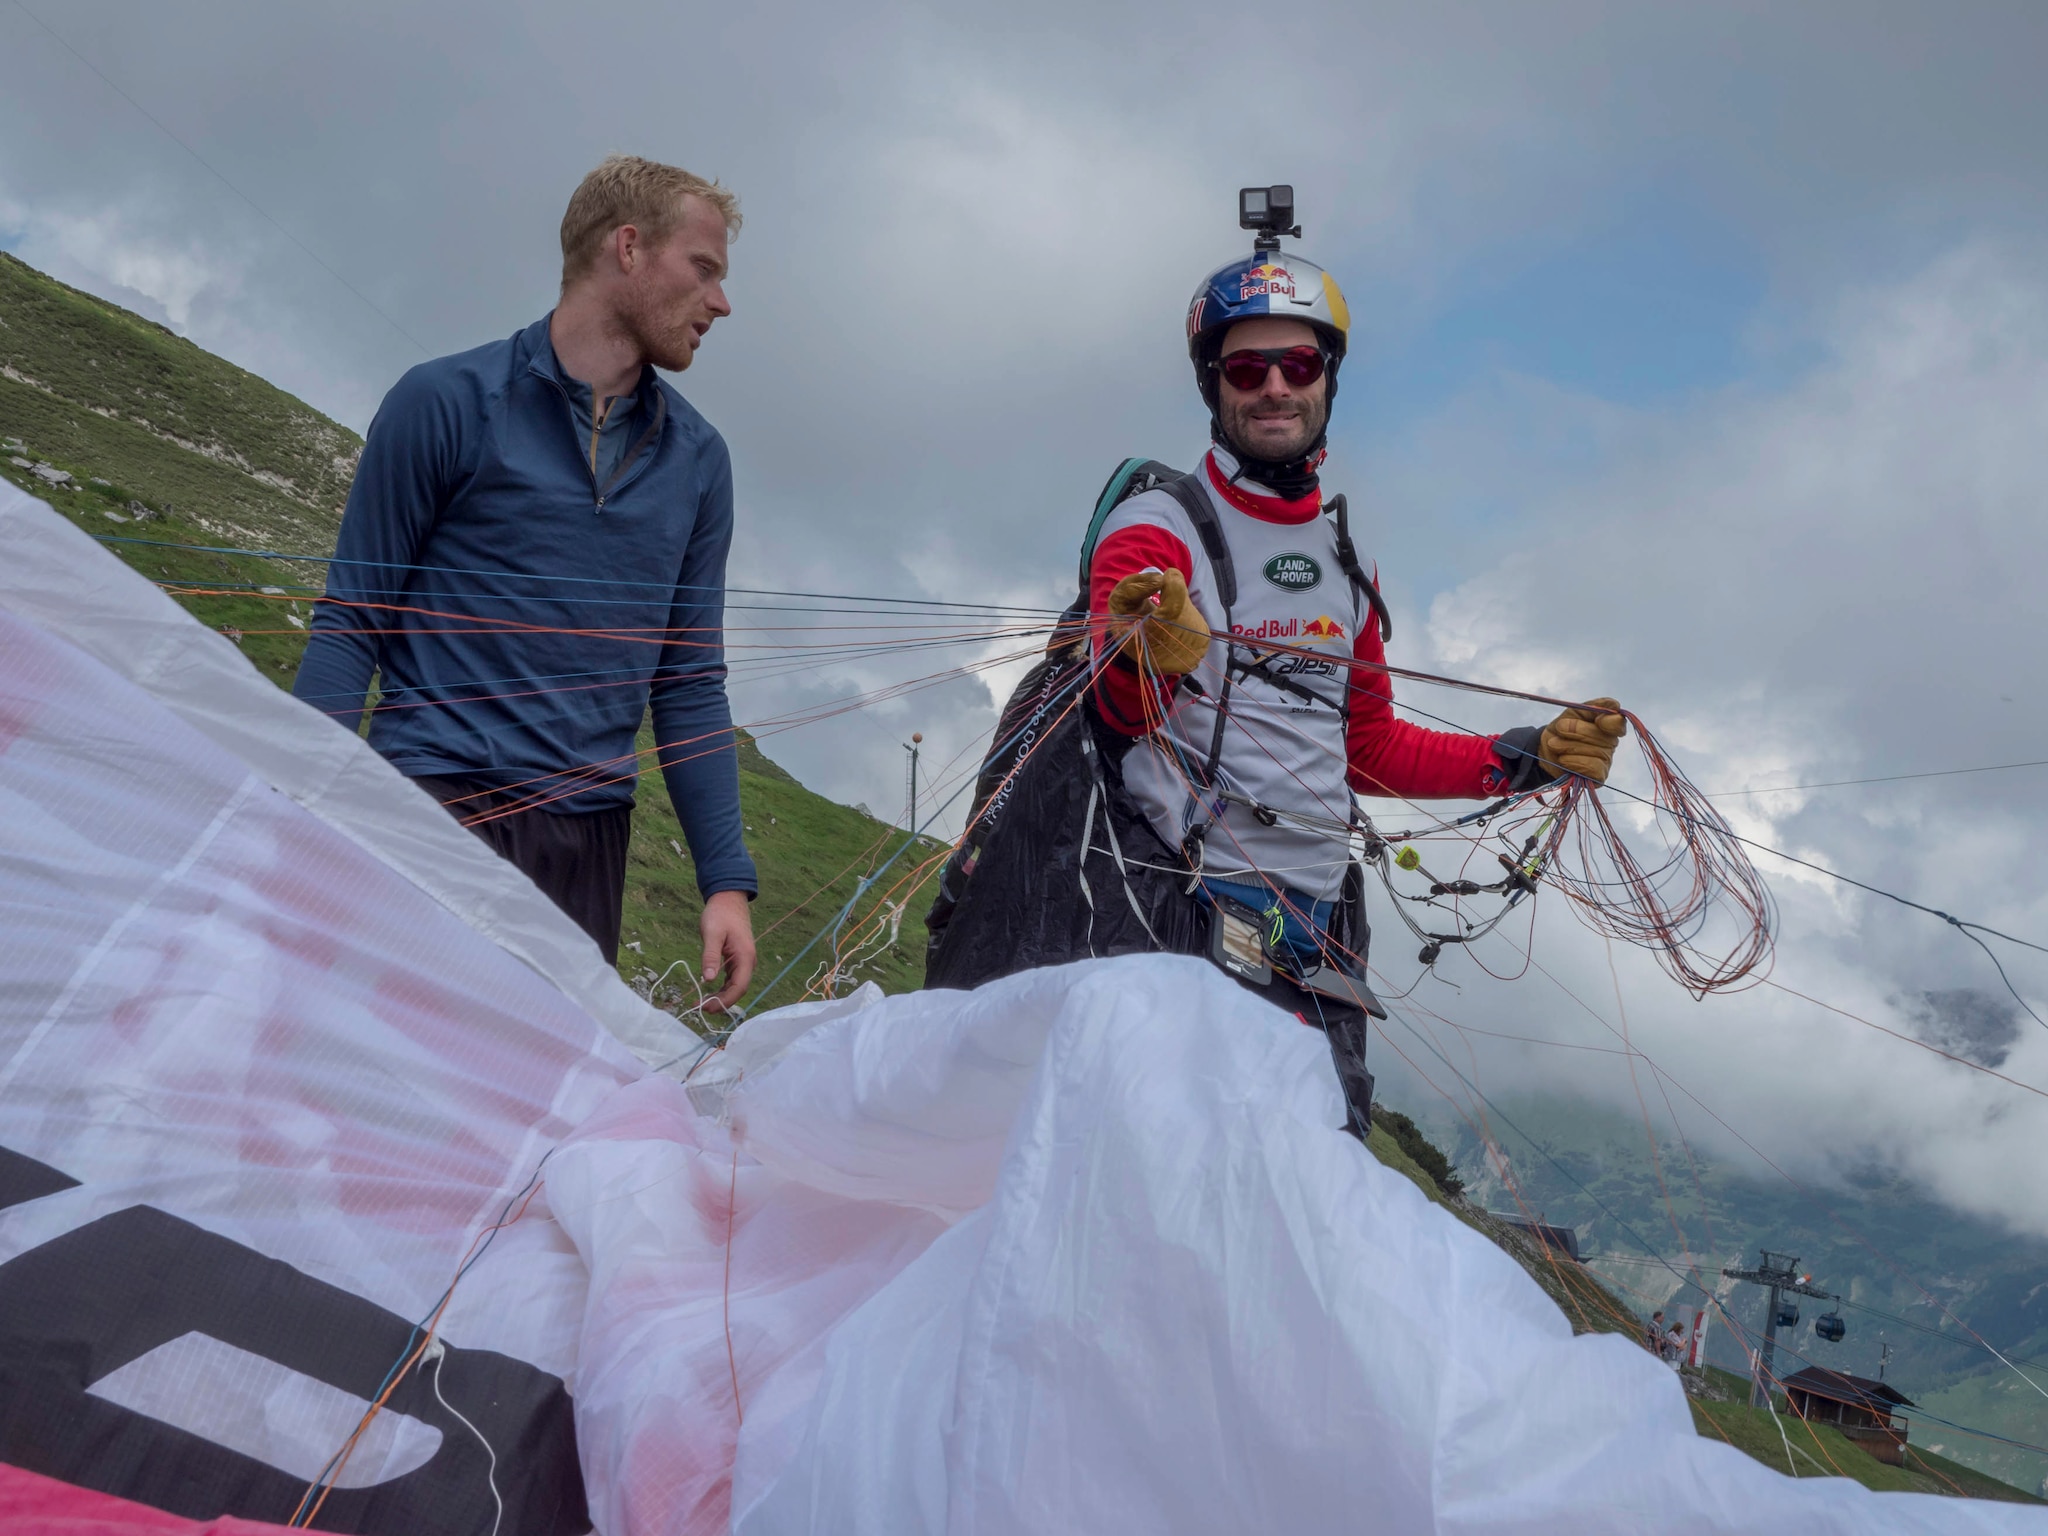 Tom de Dorlodot (BEL) performs during the Red Bull X-Alps 2021 on Grubigstein in Lermoos, Austria on June 22, 2021